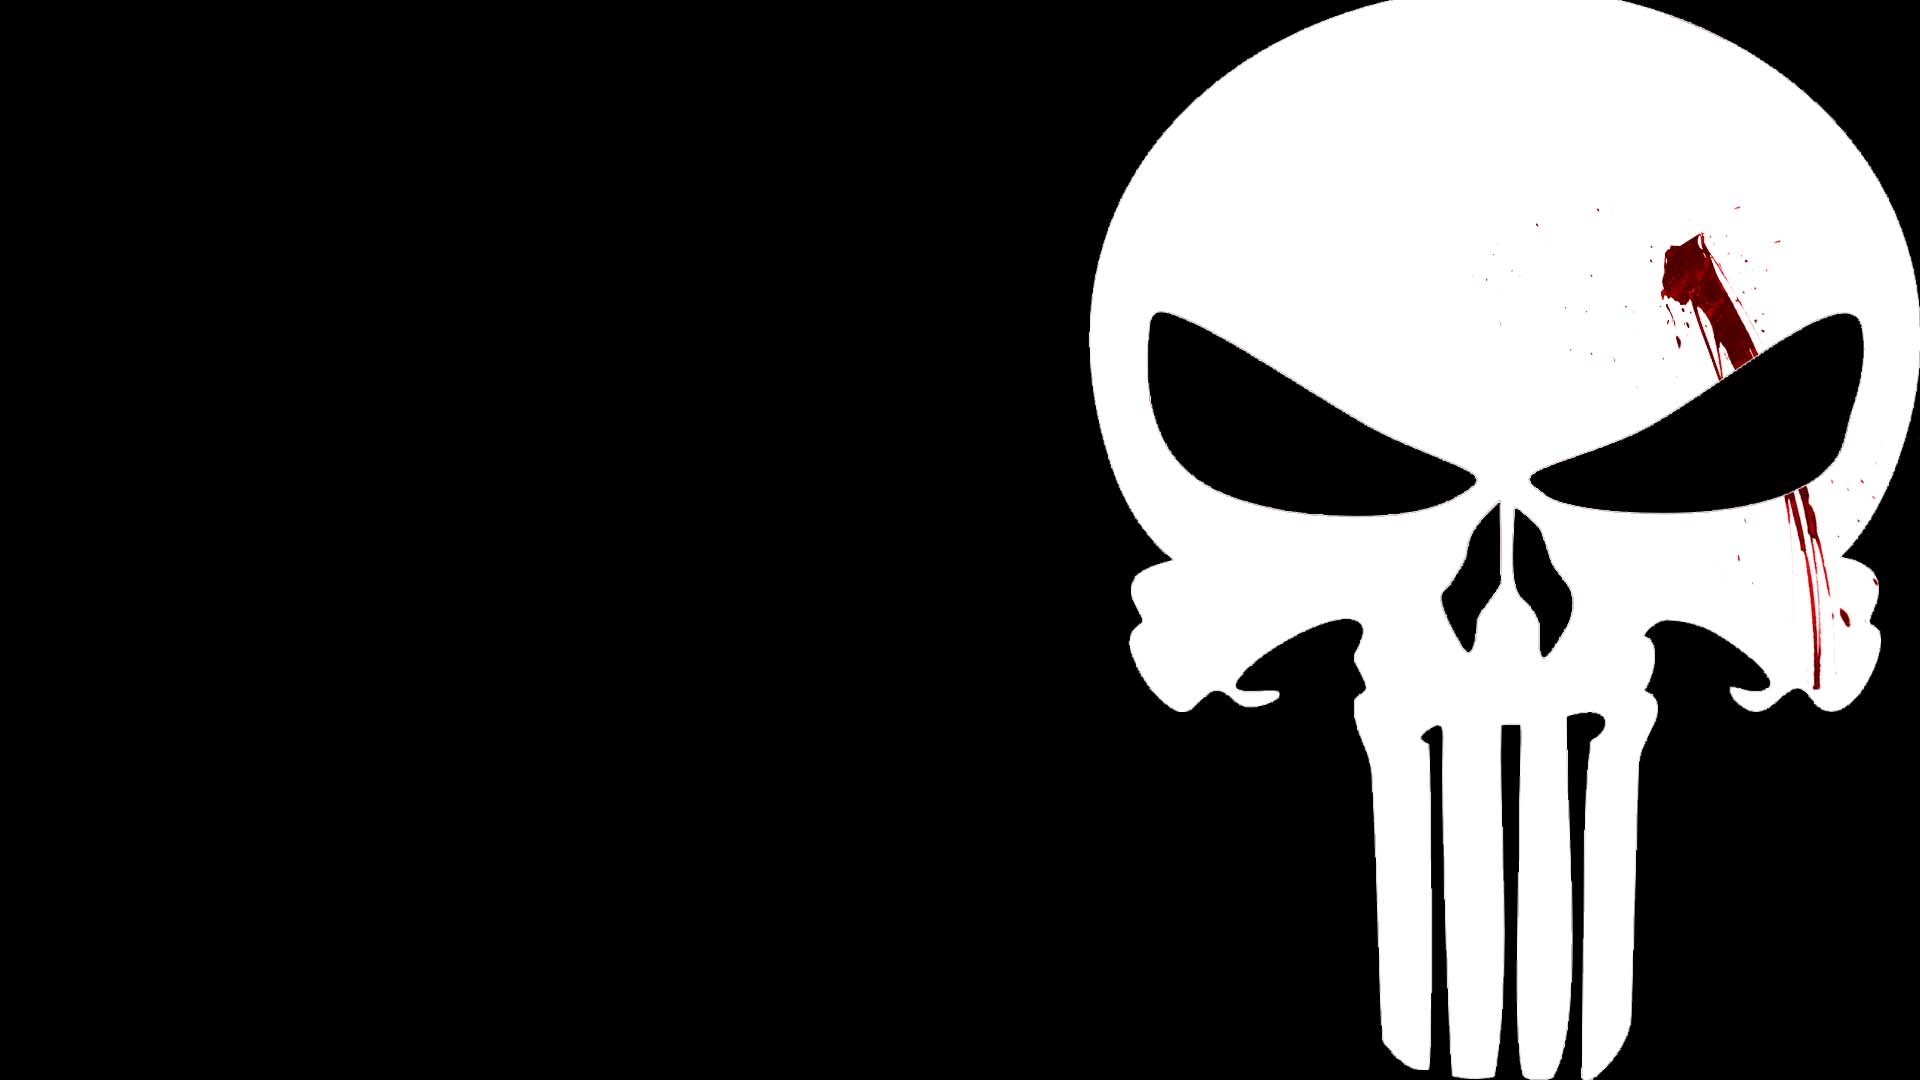 The Punisher Wallpapers - Wallpaper Cave